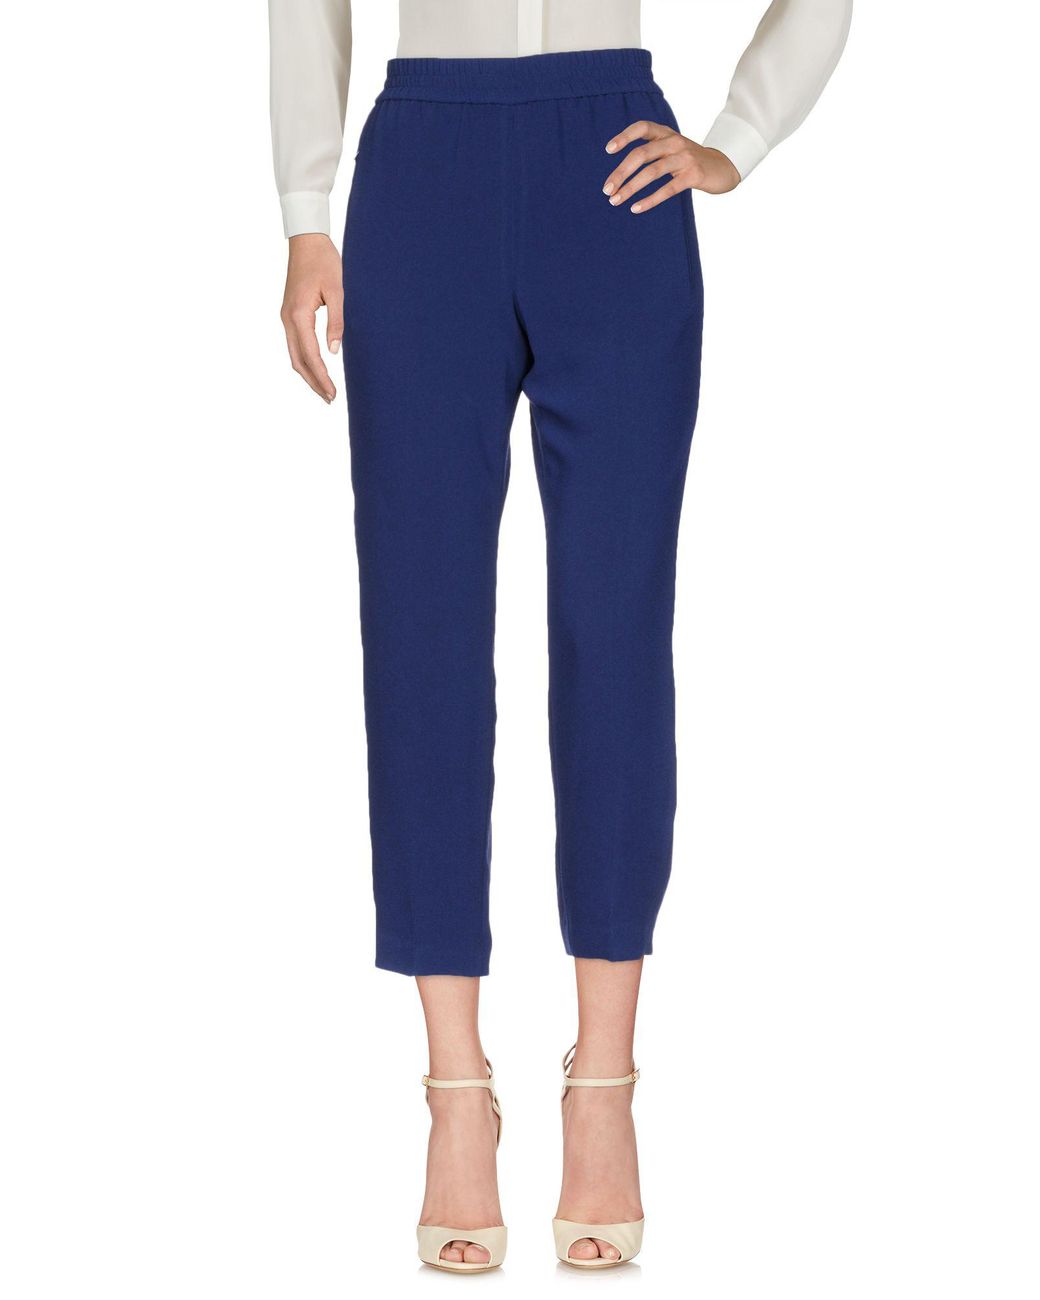 Tory Burch Synthetic Casual Pants in Blue - Lyst